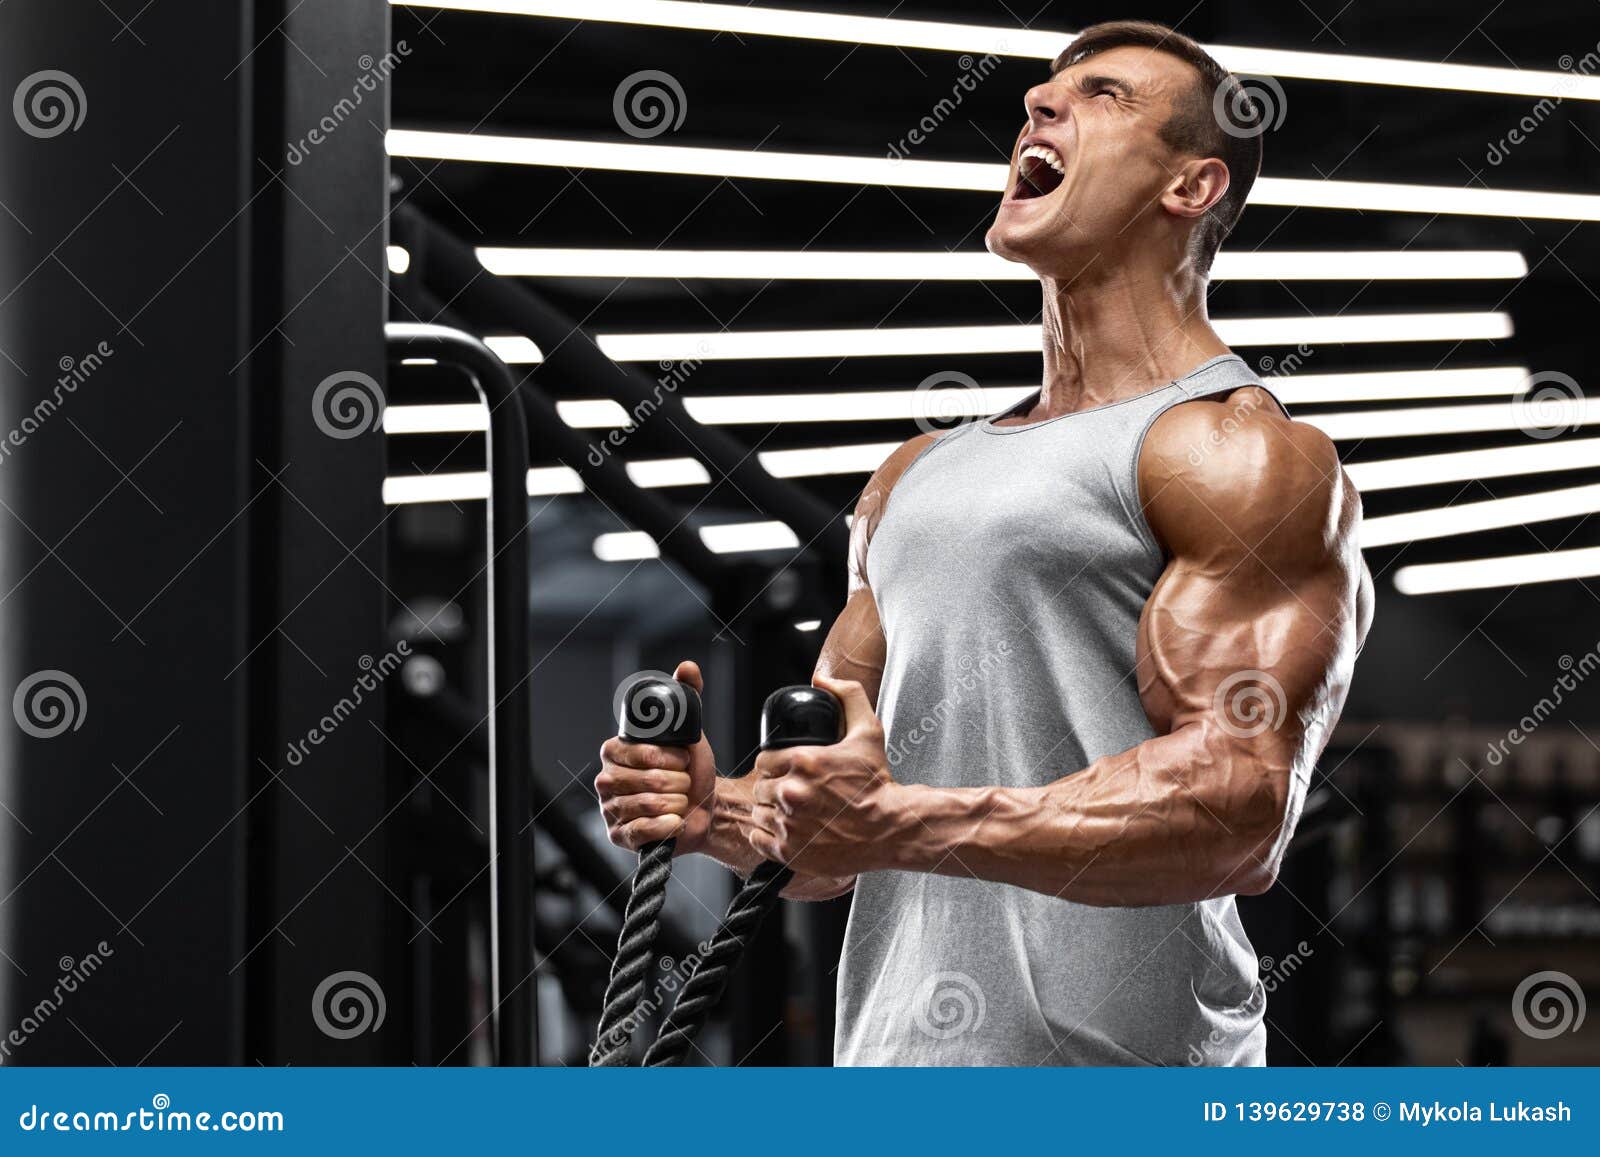 Muscular Man Working Out In Gym Doing Exercises For Biceps 